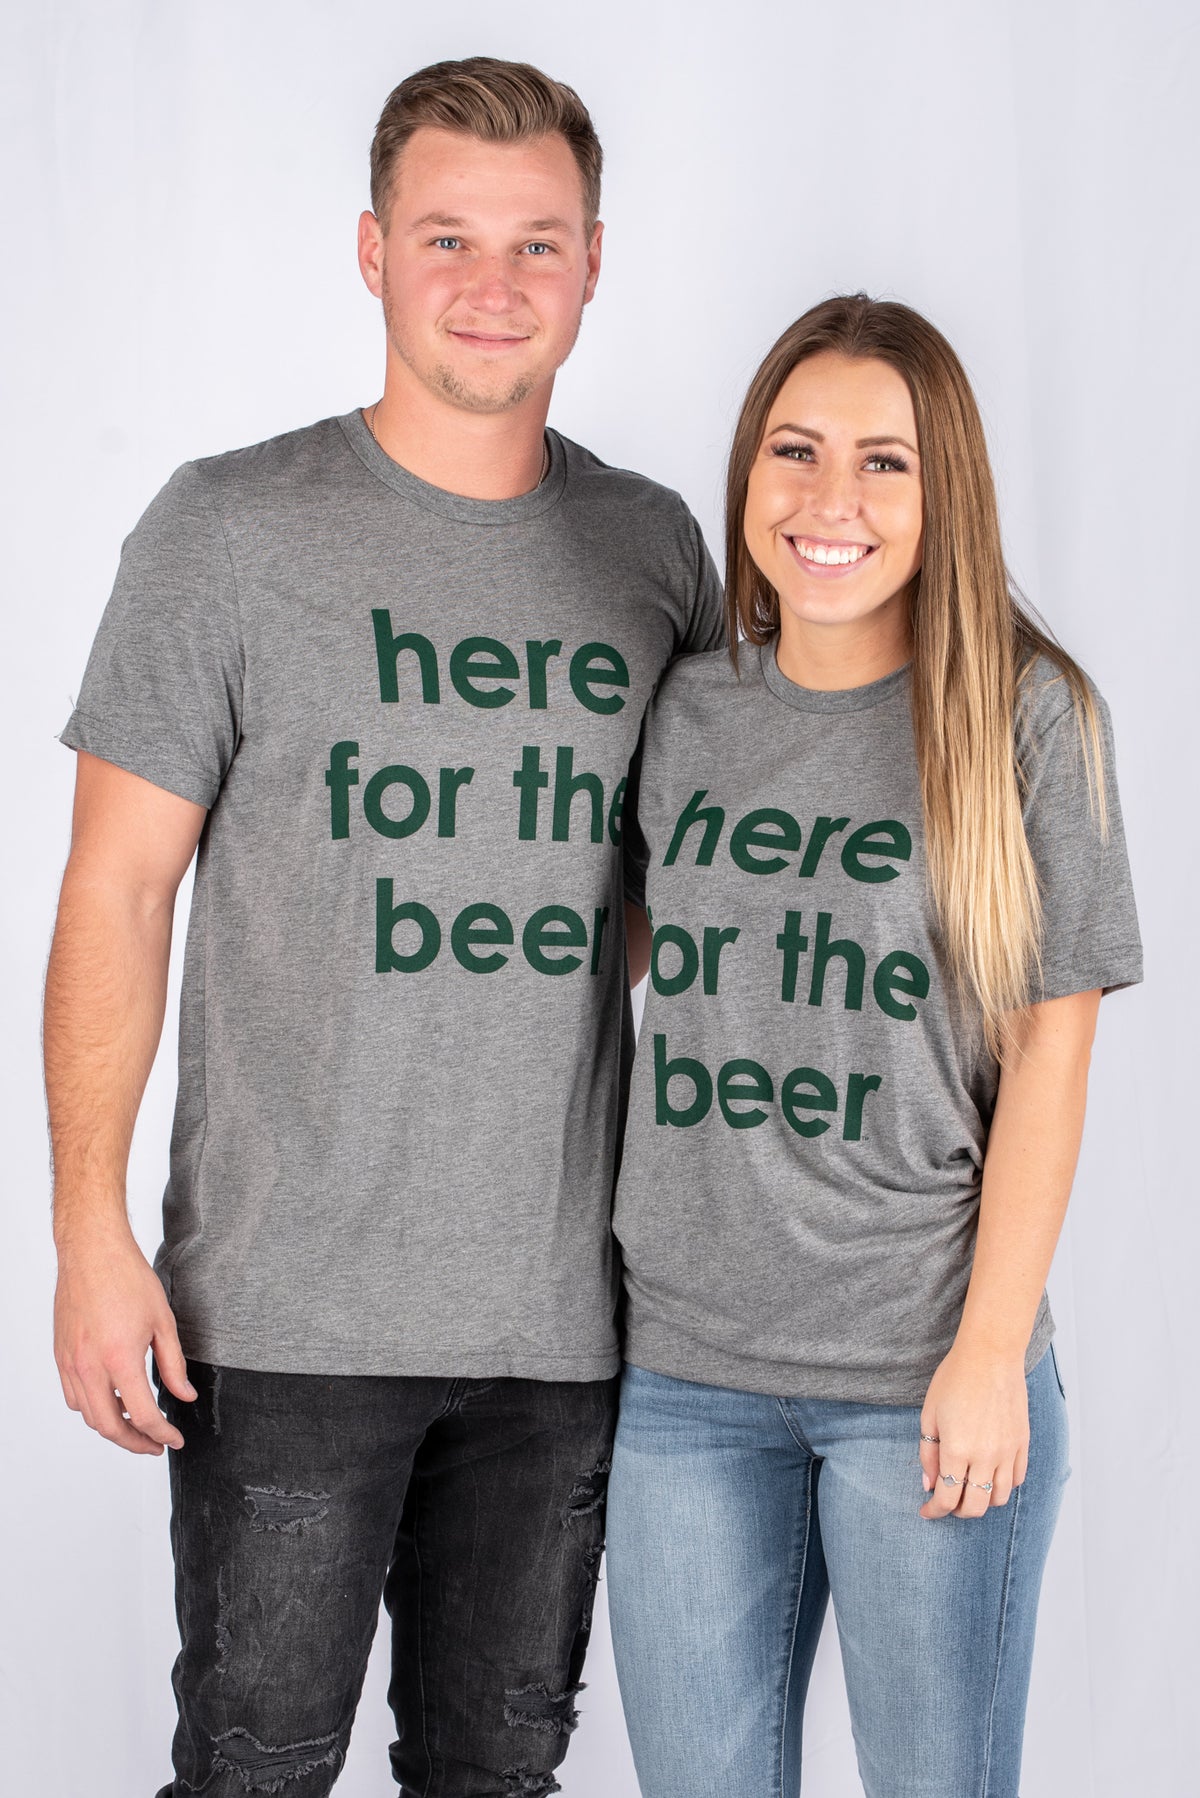 Here For The Beer Unisex Short Sleeve T-shirt Grey - Stylish T-shirts - Trendy Graphic T-Shirts and Tank Tops at Lush Fashion Lounge Boutique in Oklahoma City